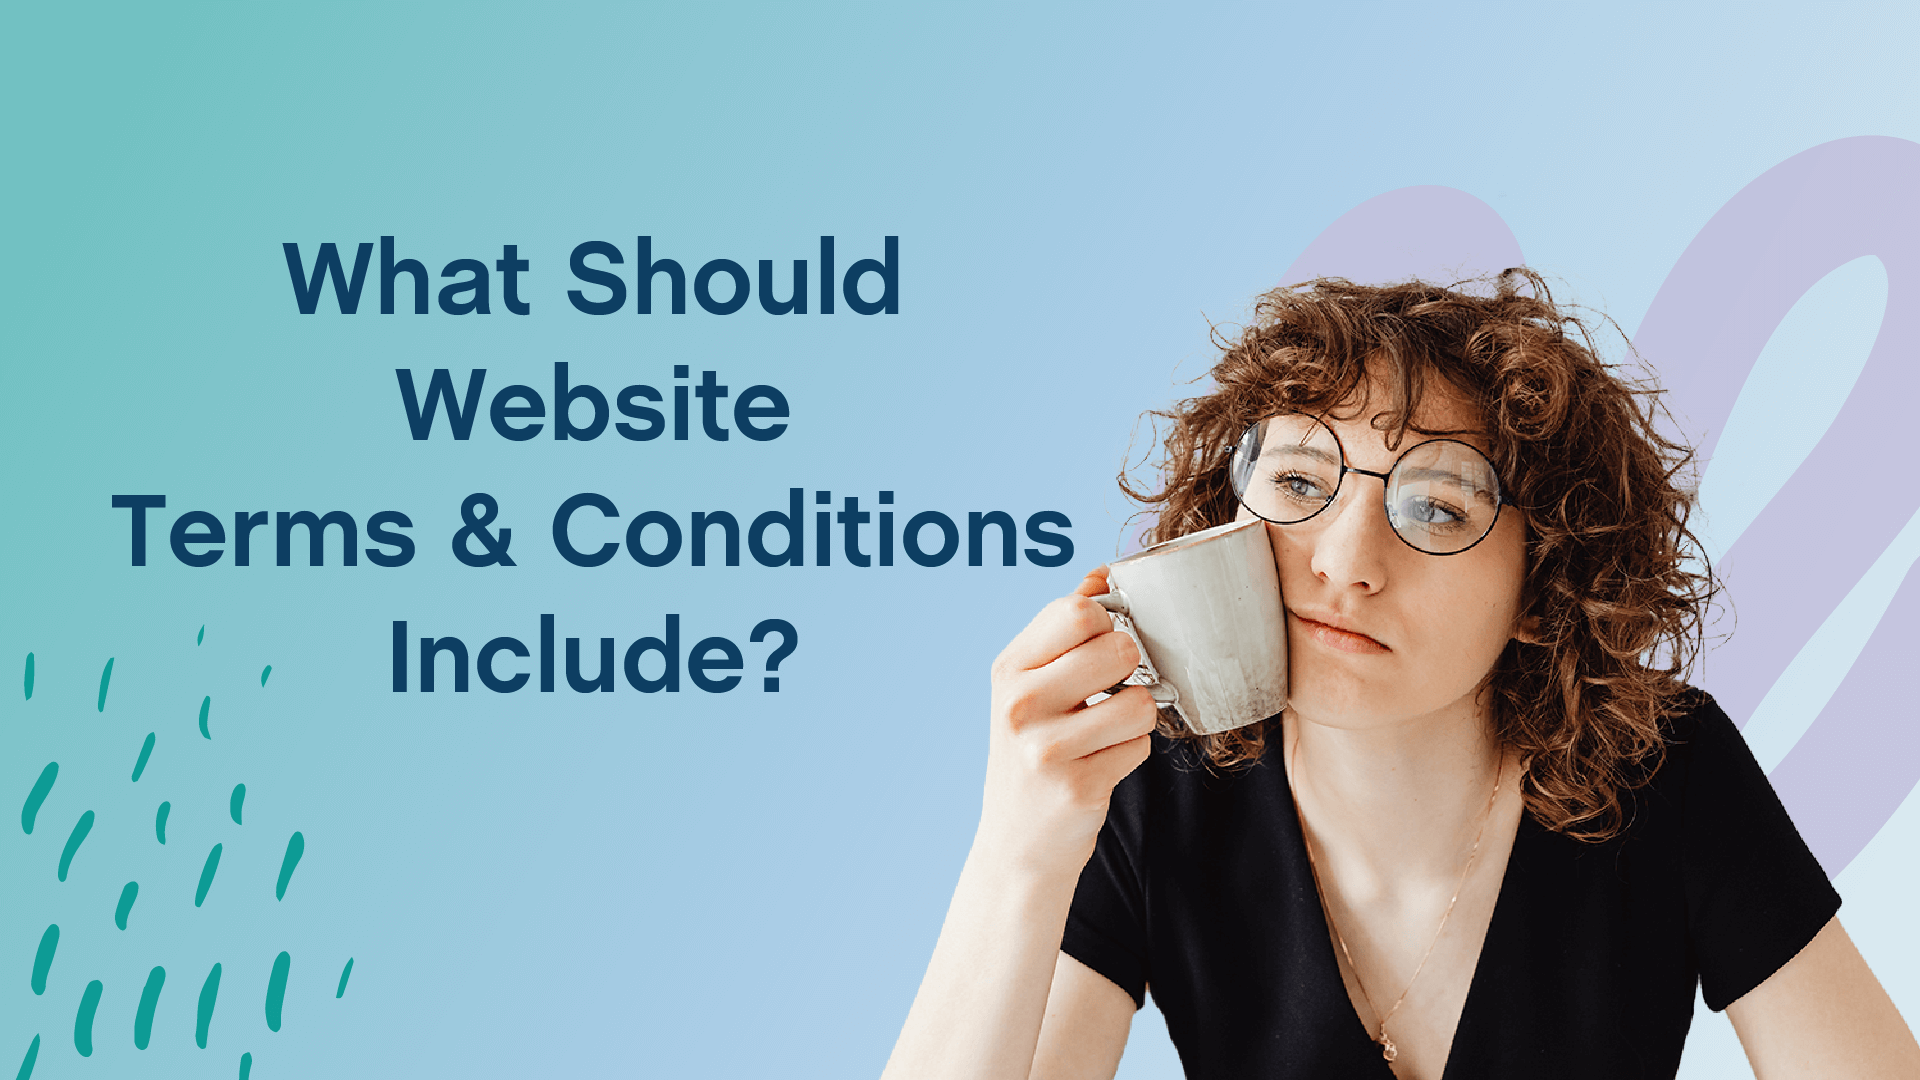 What Should Website Terms & Conditions Include?